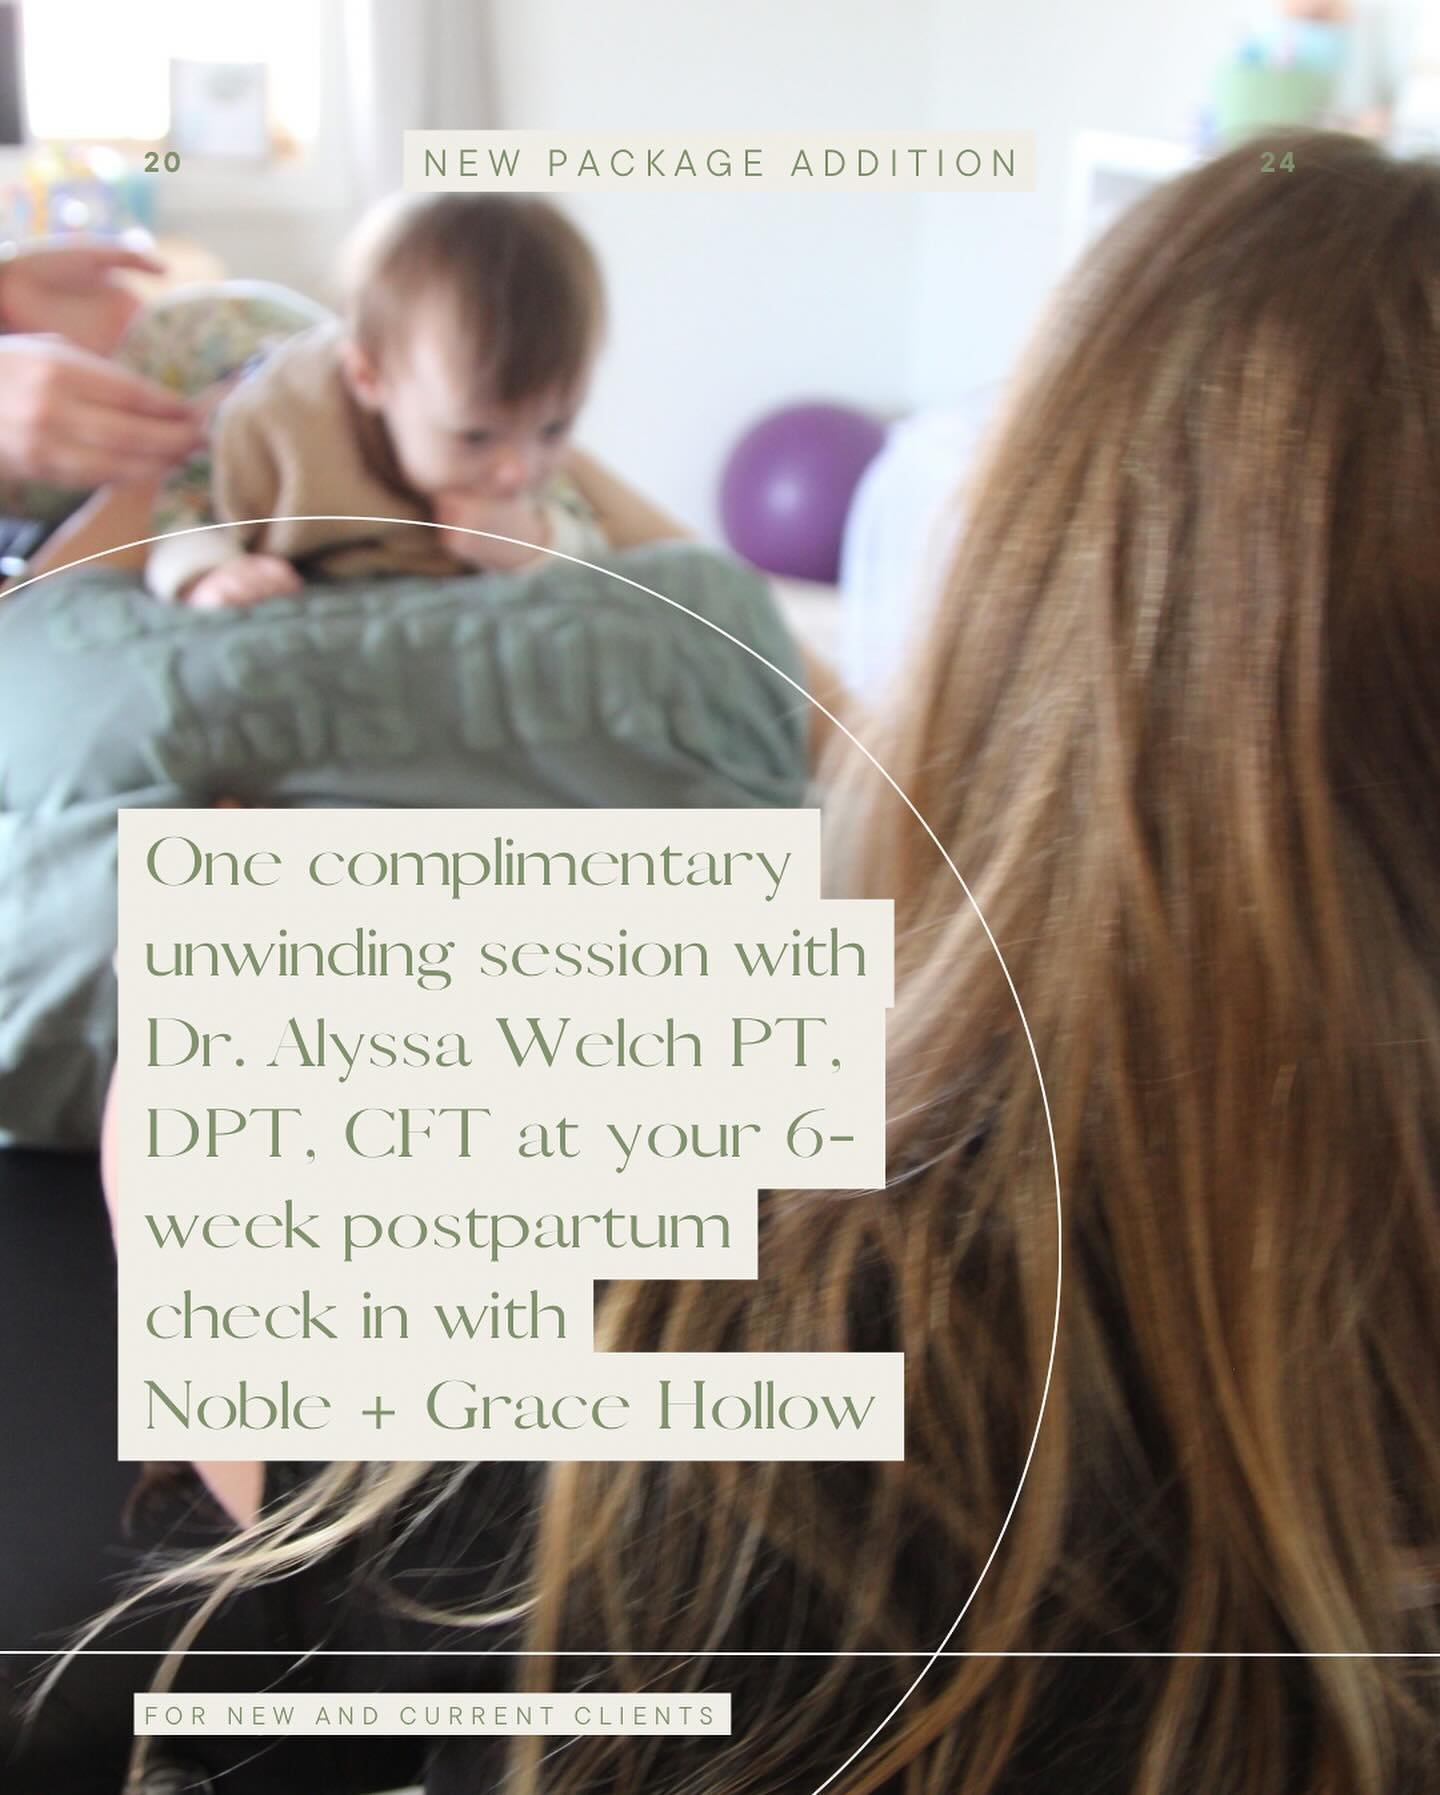 ✨ Attention NEW and CURRENT NGH clients! ✨

New feature being added to my birth packages is a visit with Dr Alyssa Welch, the owner of @southeast_fascial_therapy ! At our 6-week check in, we will visit at my office for an hour to do our final wrap up